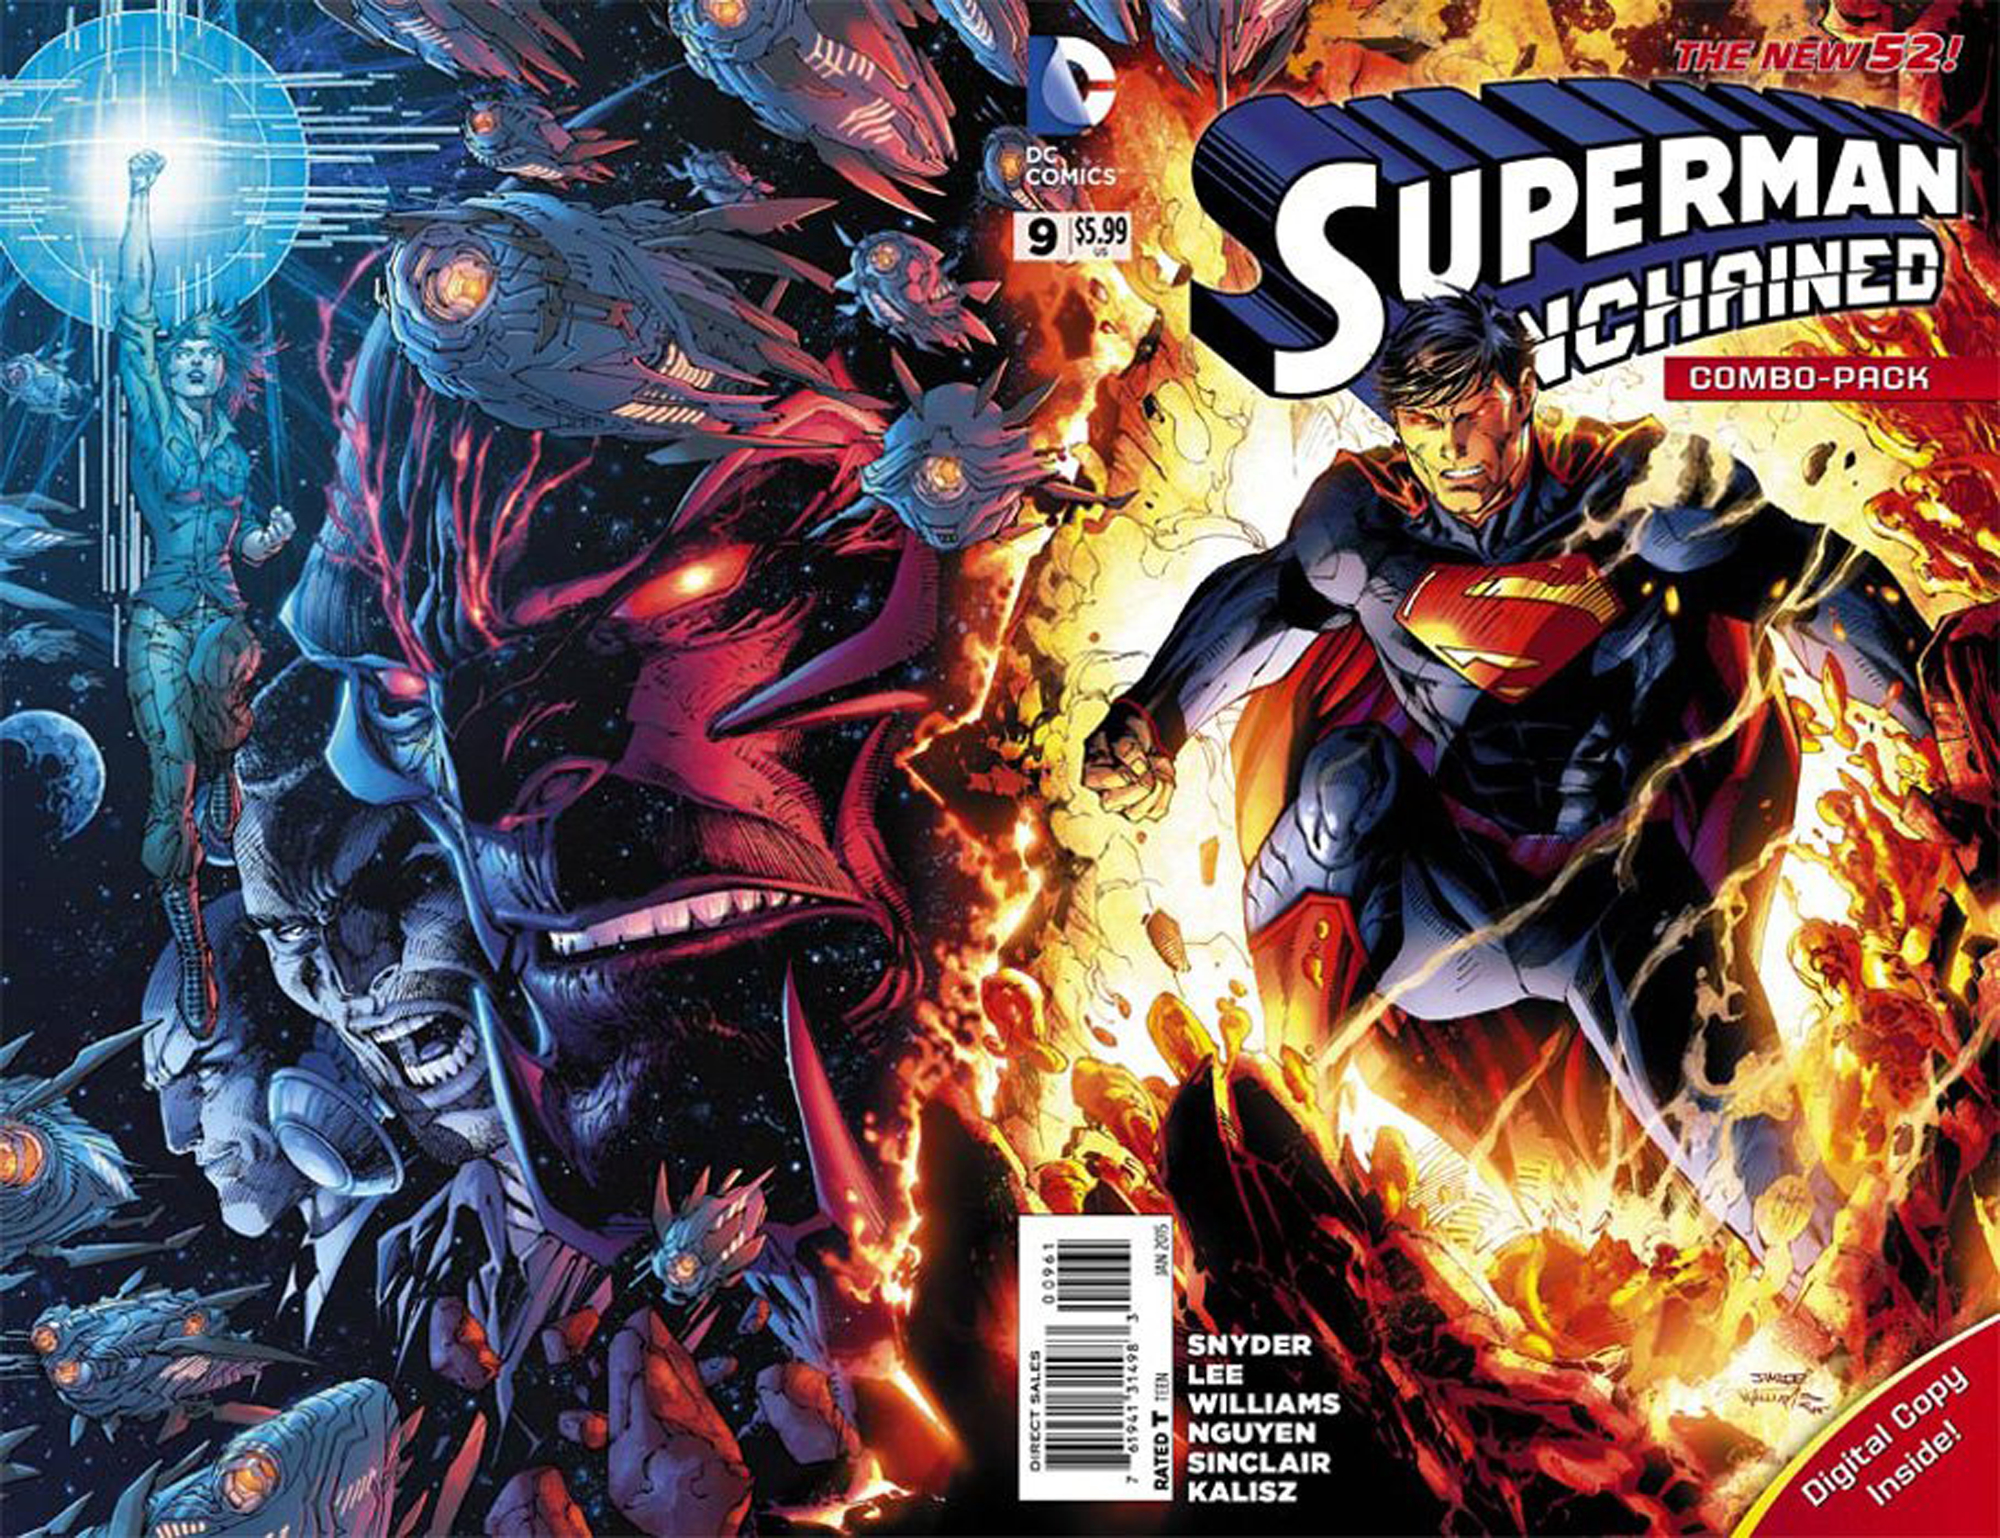 SUPERMAN UNCHAINED GRAPHIC NOVEL New Paperback Collects 9 Part Series 